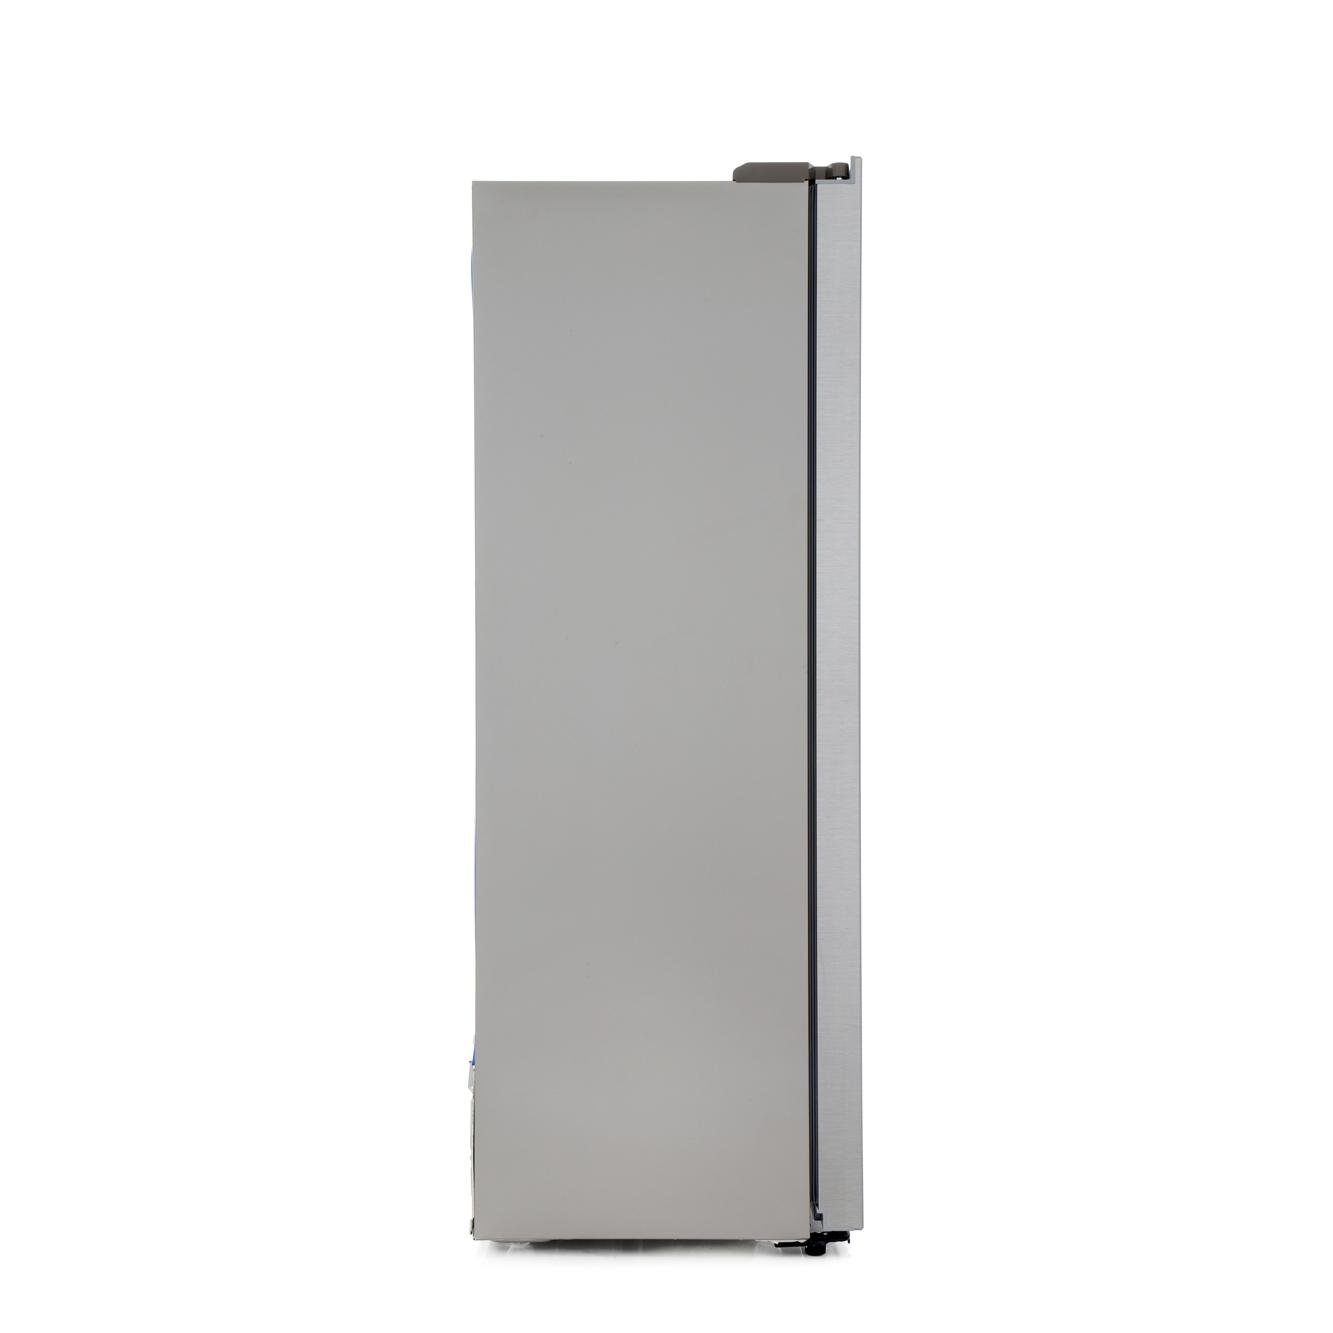 Haier HRF-522IG6 (Stainless Steel), Refrigerators Reviews and Comments